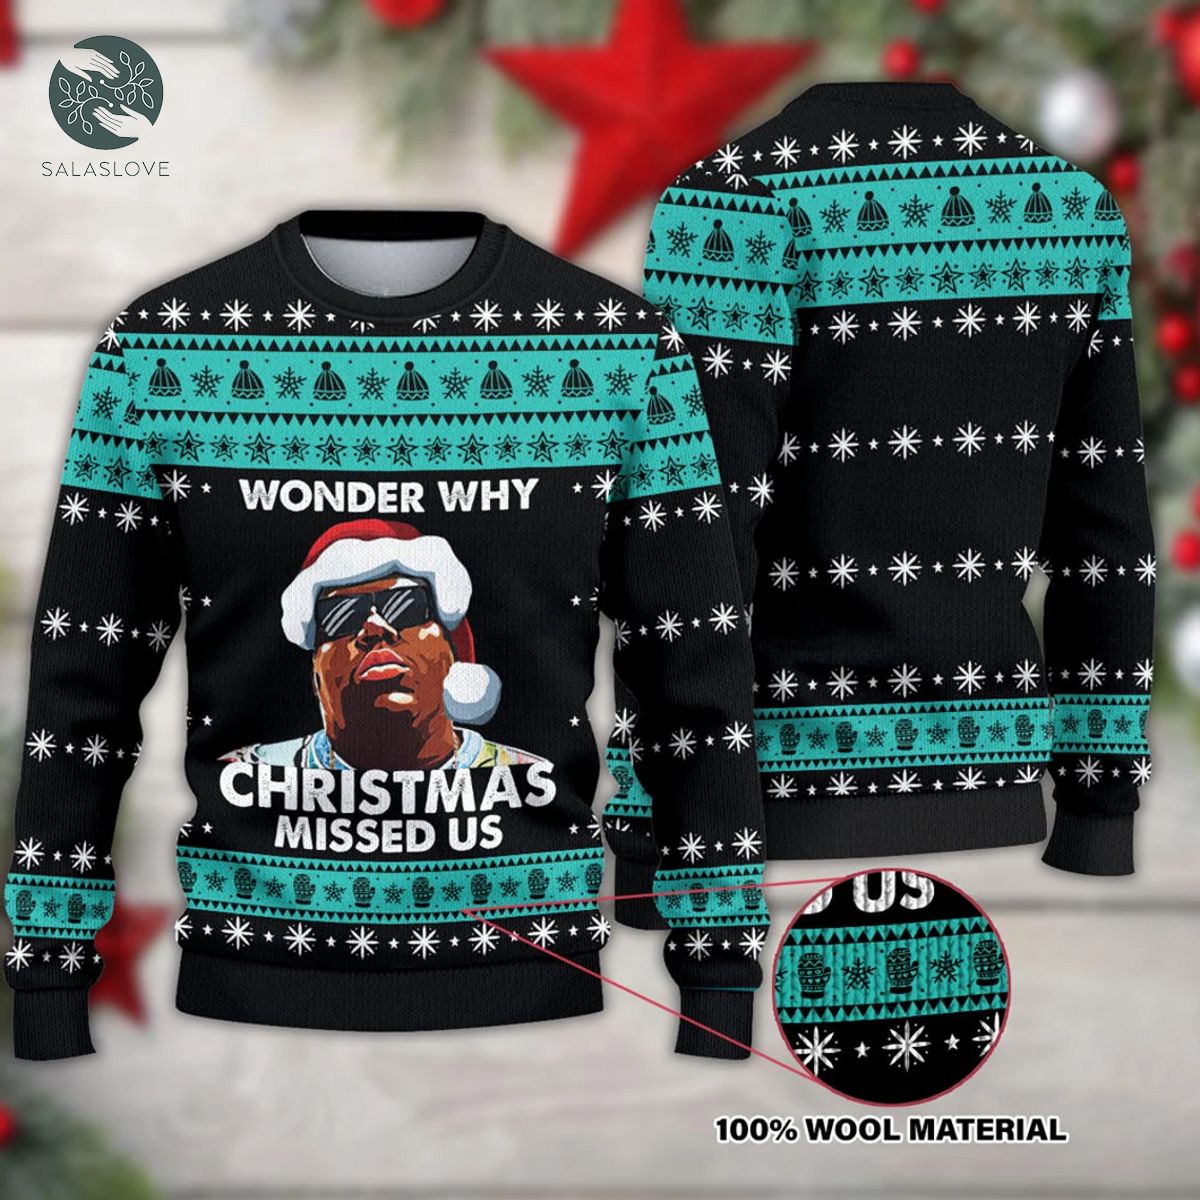 Notorious BIG Wonder Why Christmas Sweater

